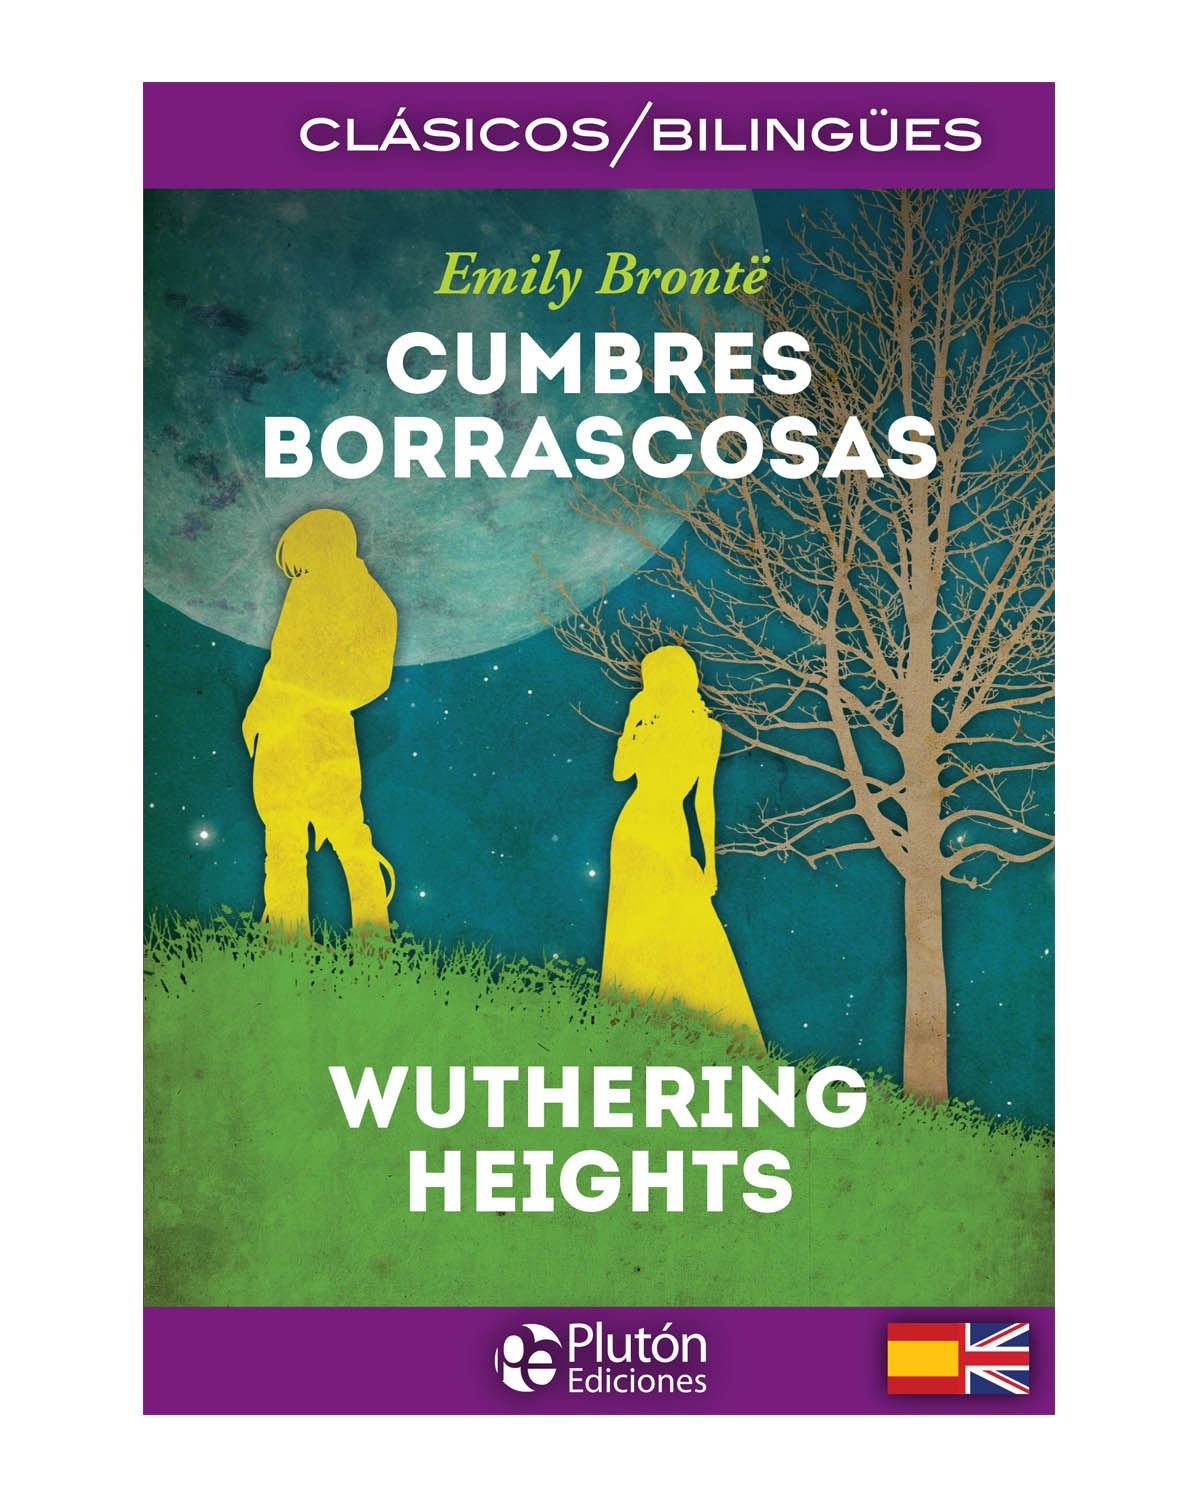 Cumbres Borrascosas / Wuthering Heights